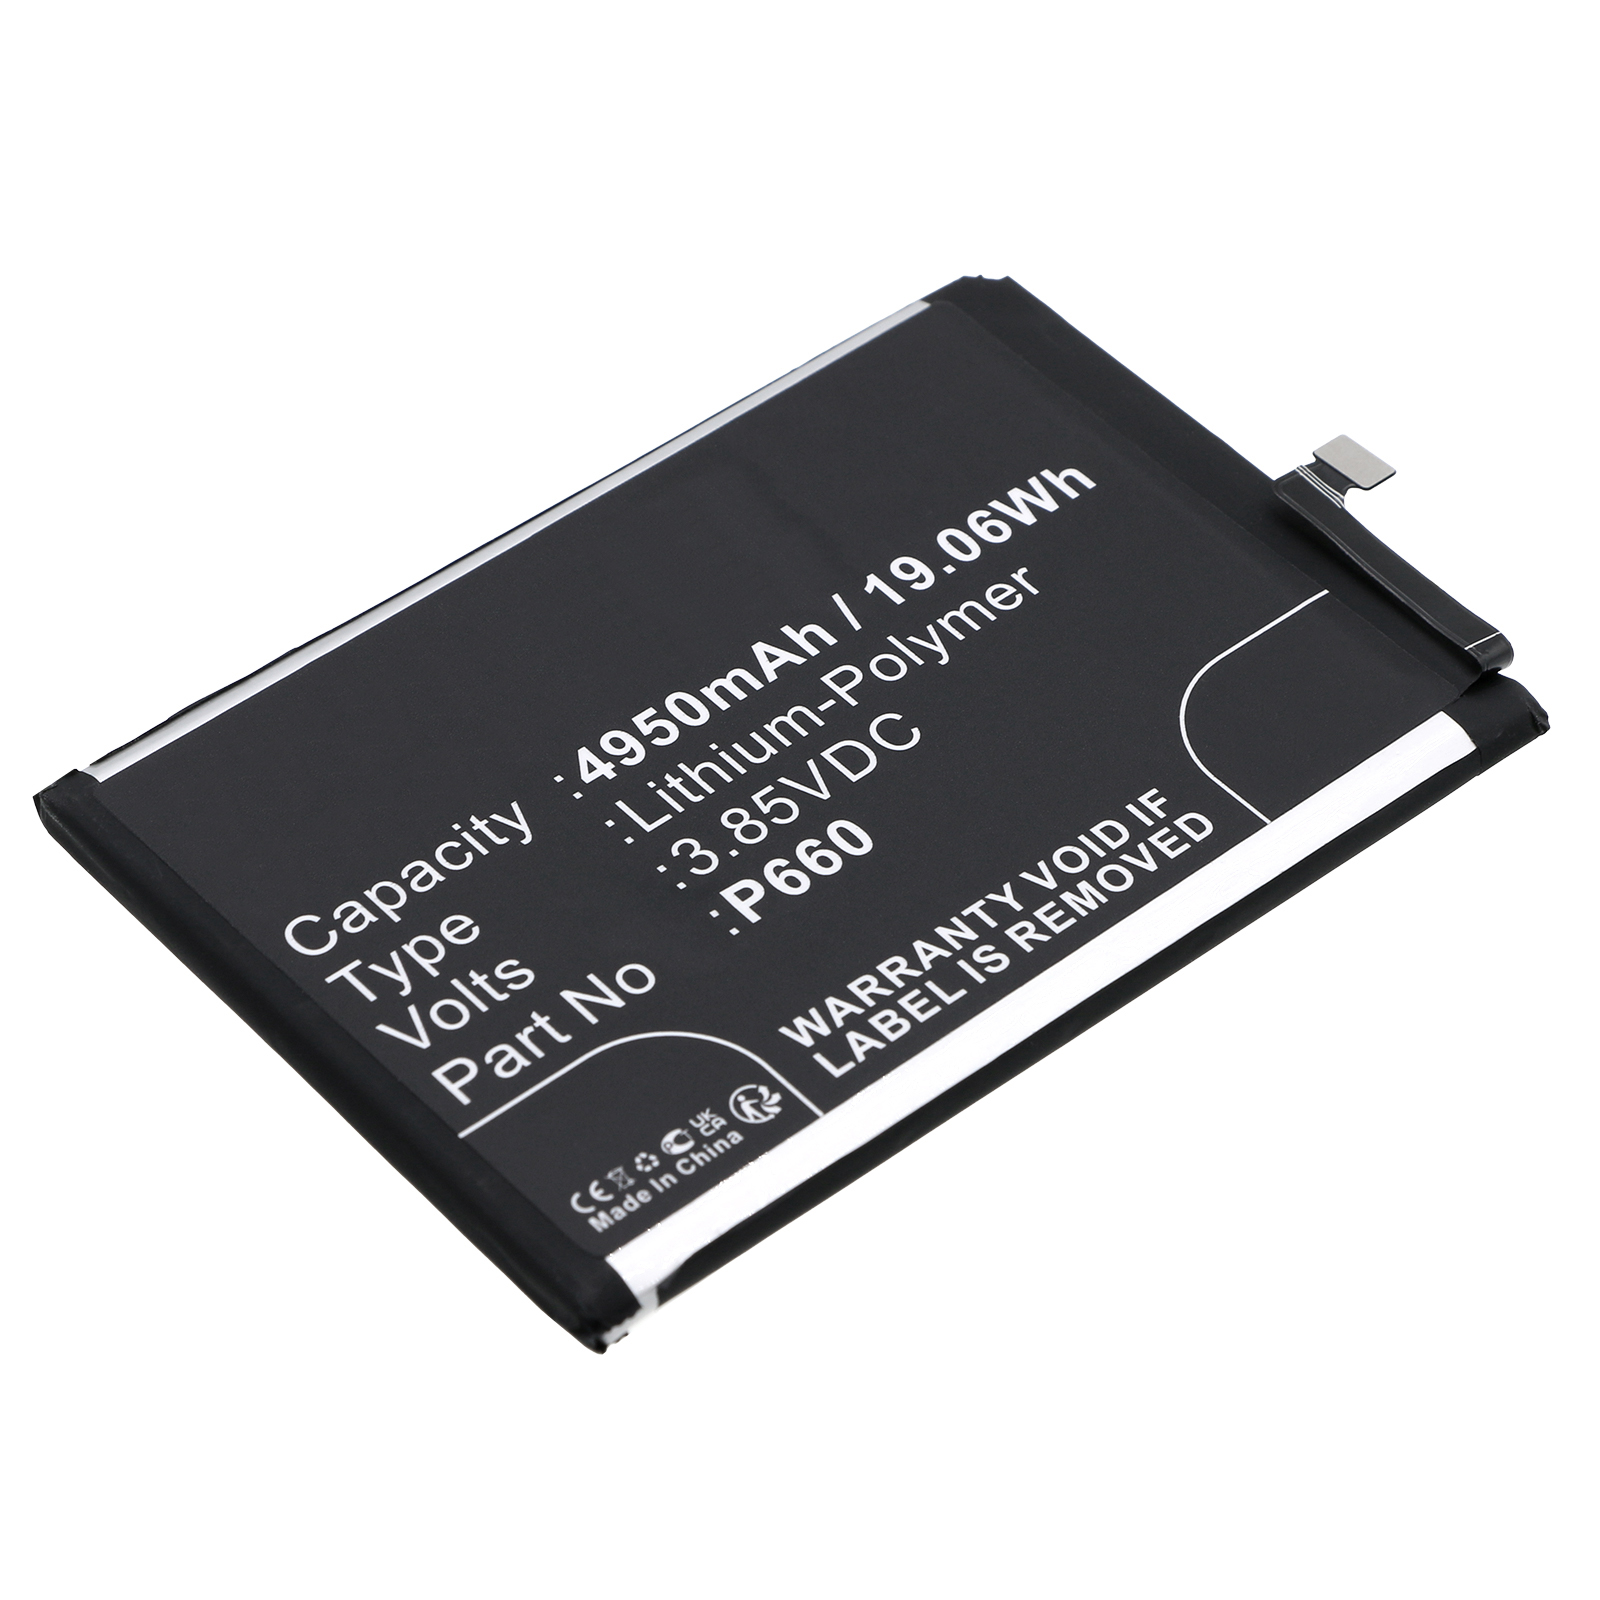 Synergy Digital Cell Phone Battery, Compatible with Nokia P660 Cell Phone Battery (Li-Pol, 3.85V, 4950mAh)